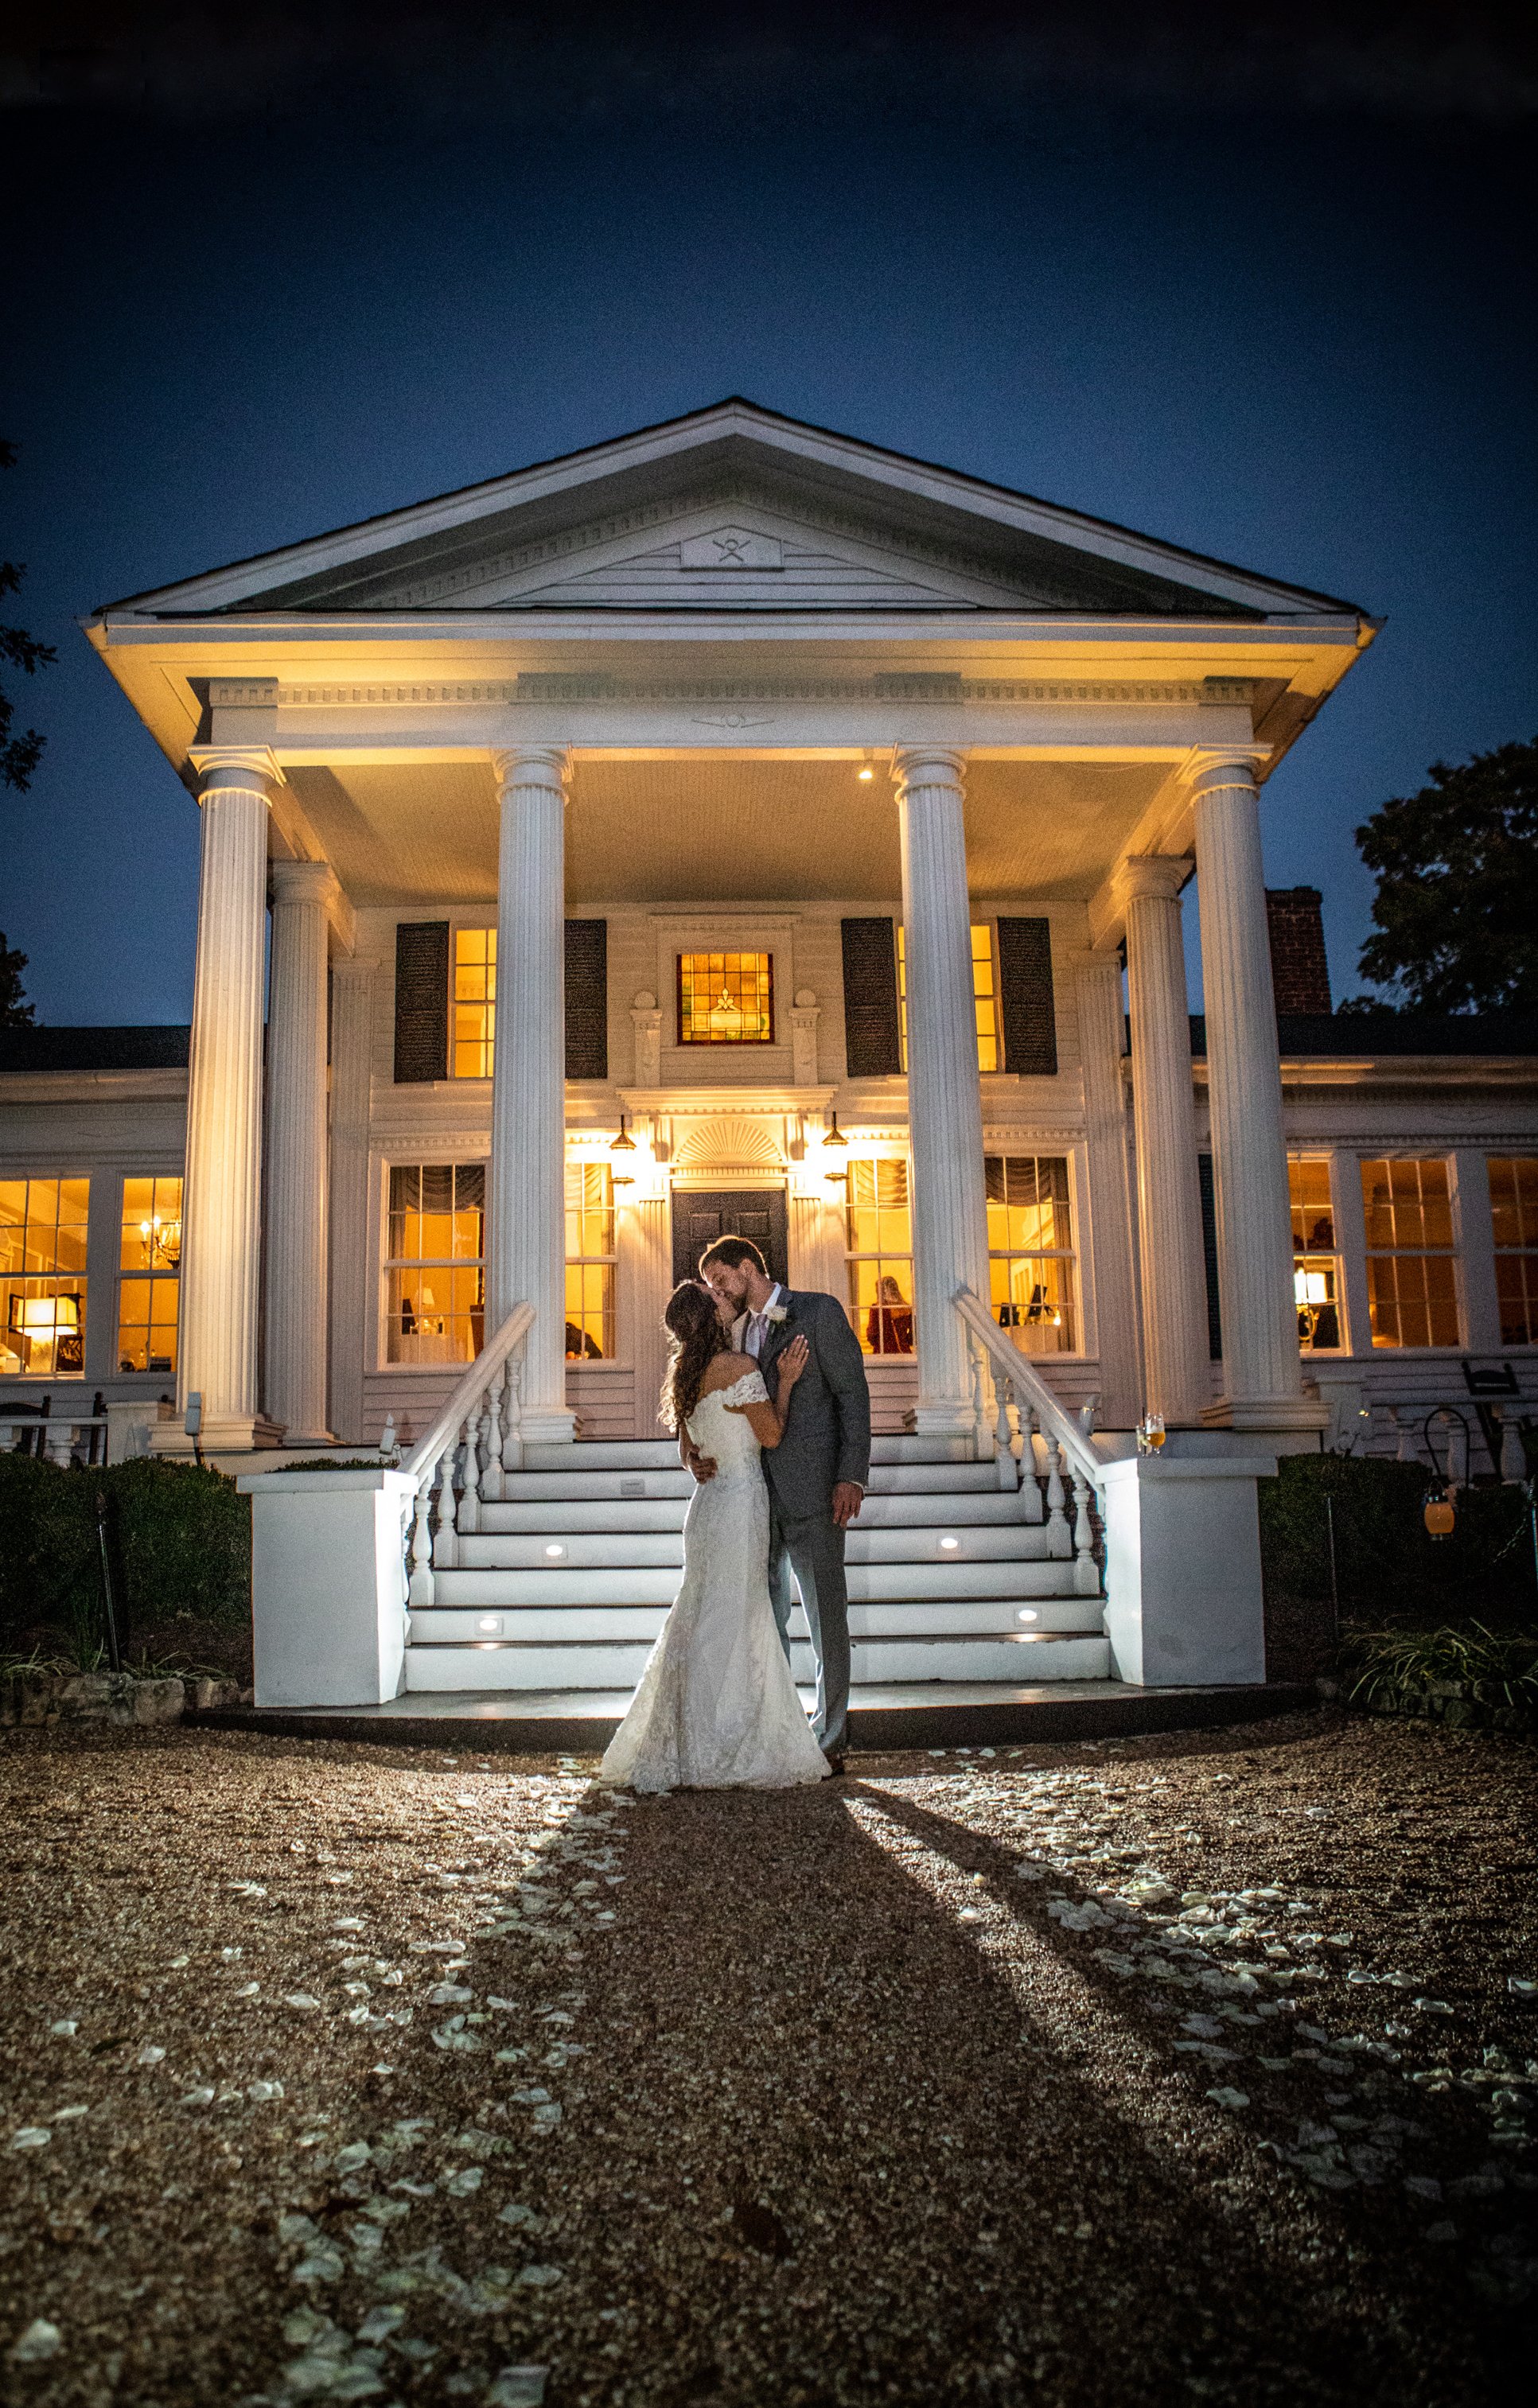 Photography by the Atlanta's Best Wedding Photographers at AtlantaArtisticWeddings with photo documentary style.  Atlanta Artistic Weddings shares Atlanta's Best Wedding Venues for Bride and Grooms.